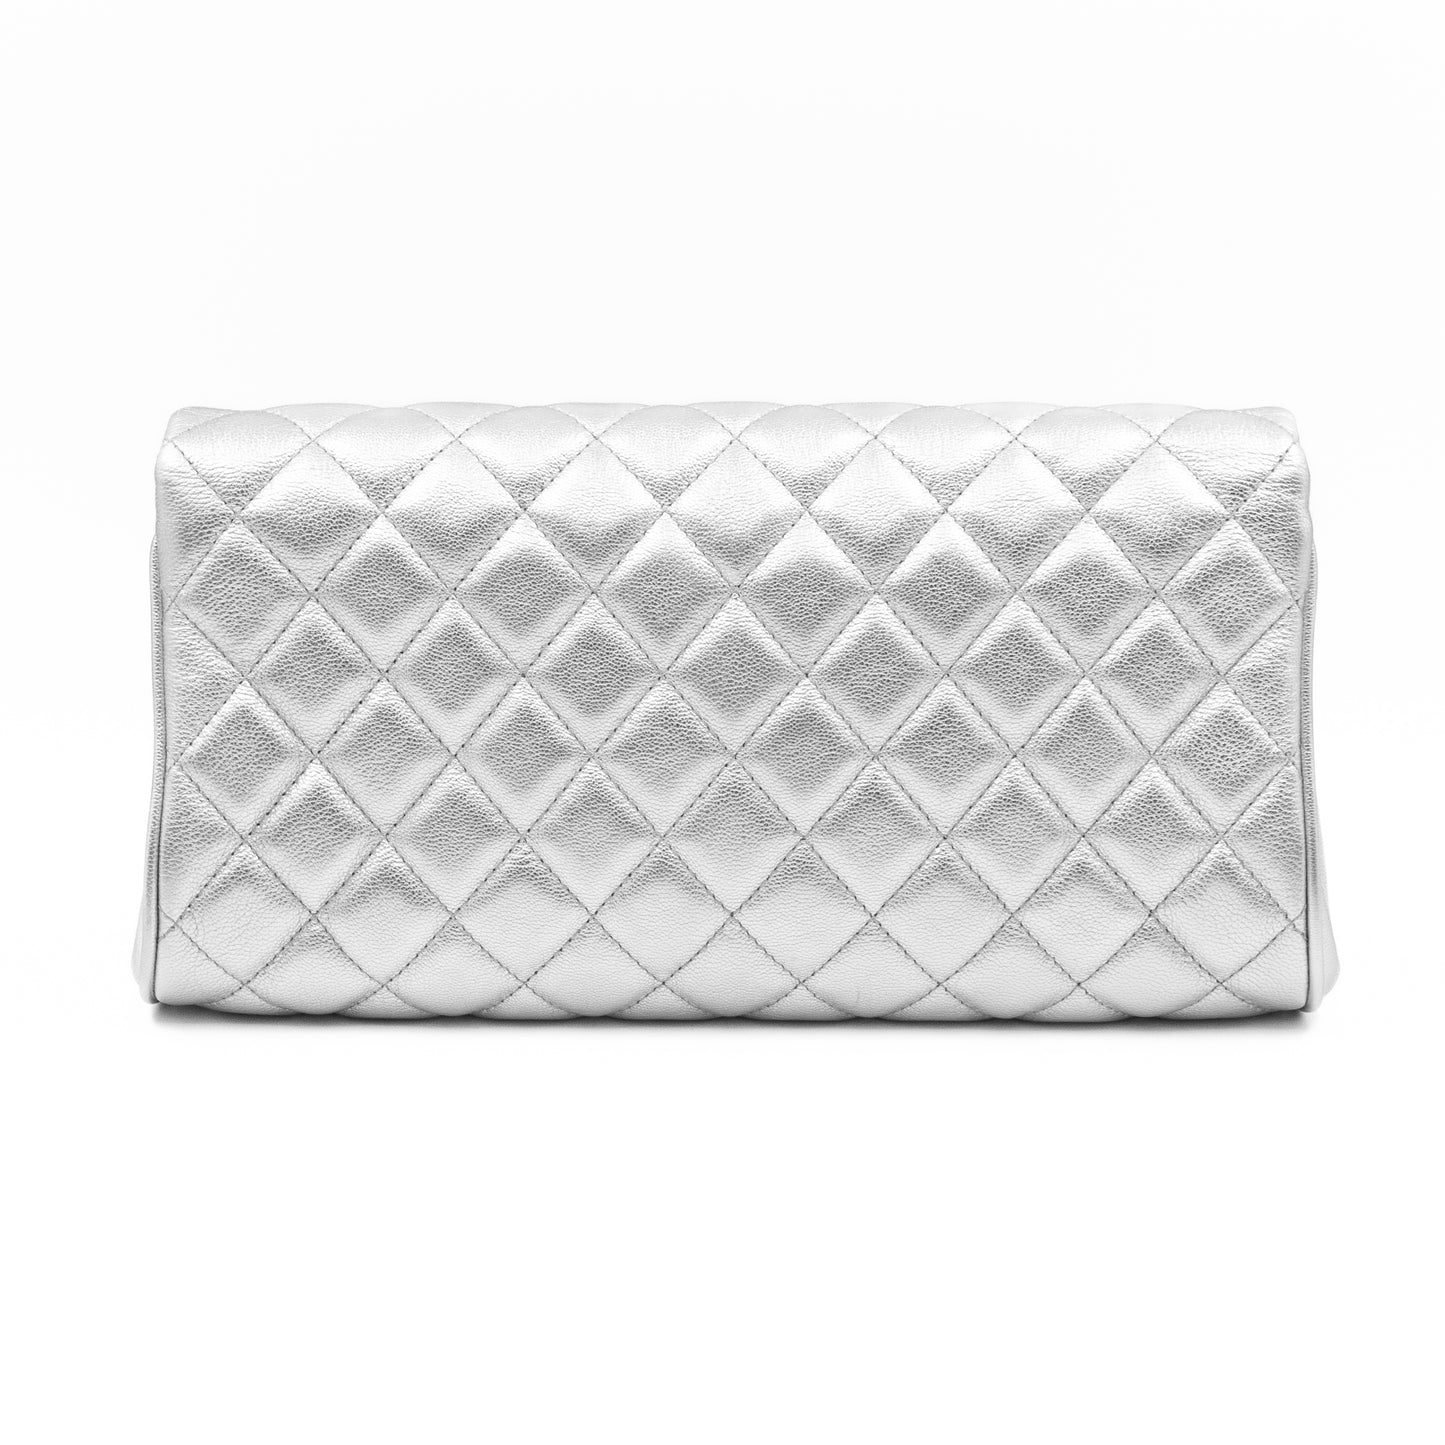 Fold Up Again Clutch Silver Metallic Leather